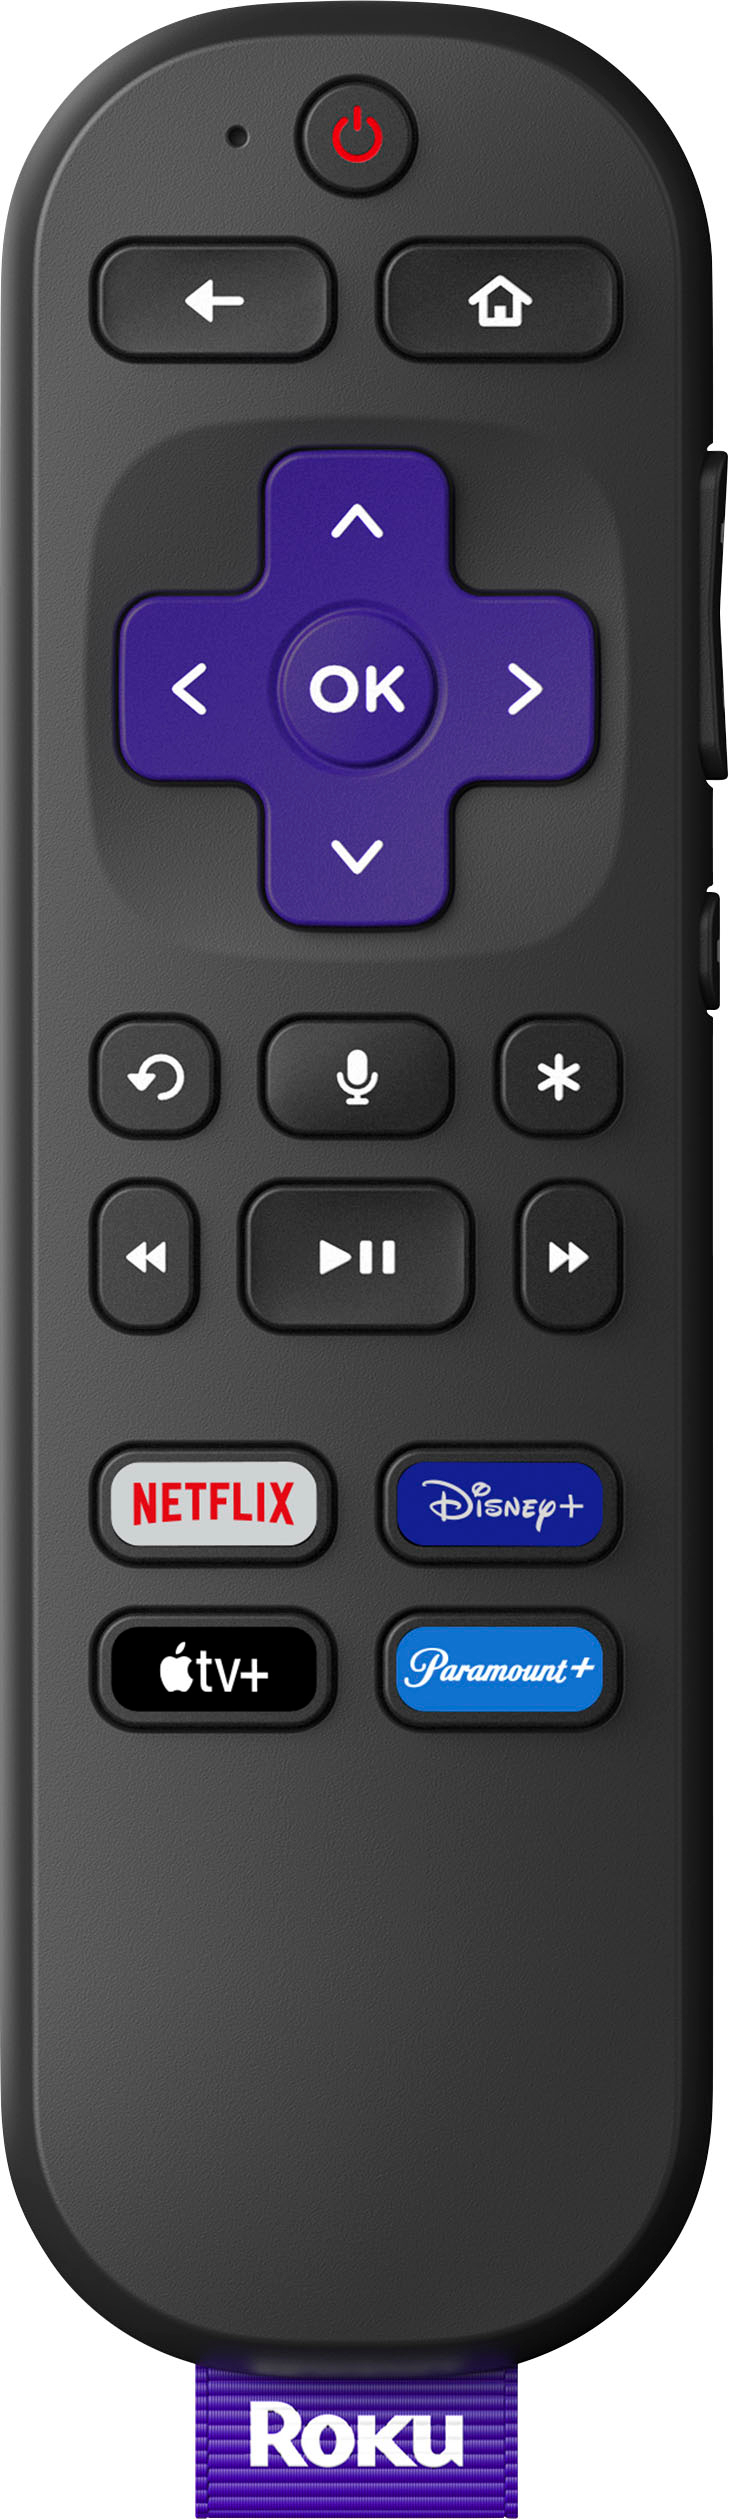 Roku Streaming Stick 4K+ Streaming Device 4K/HDR/Dolby Vision with Roku Voice Remote Pro 2021 Black 